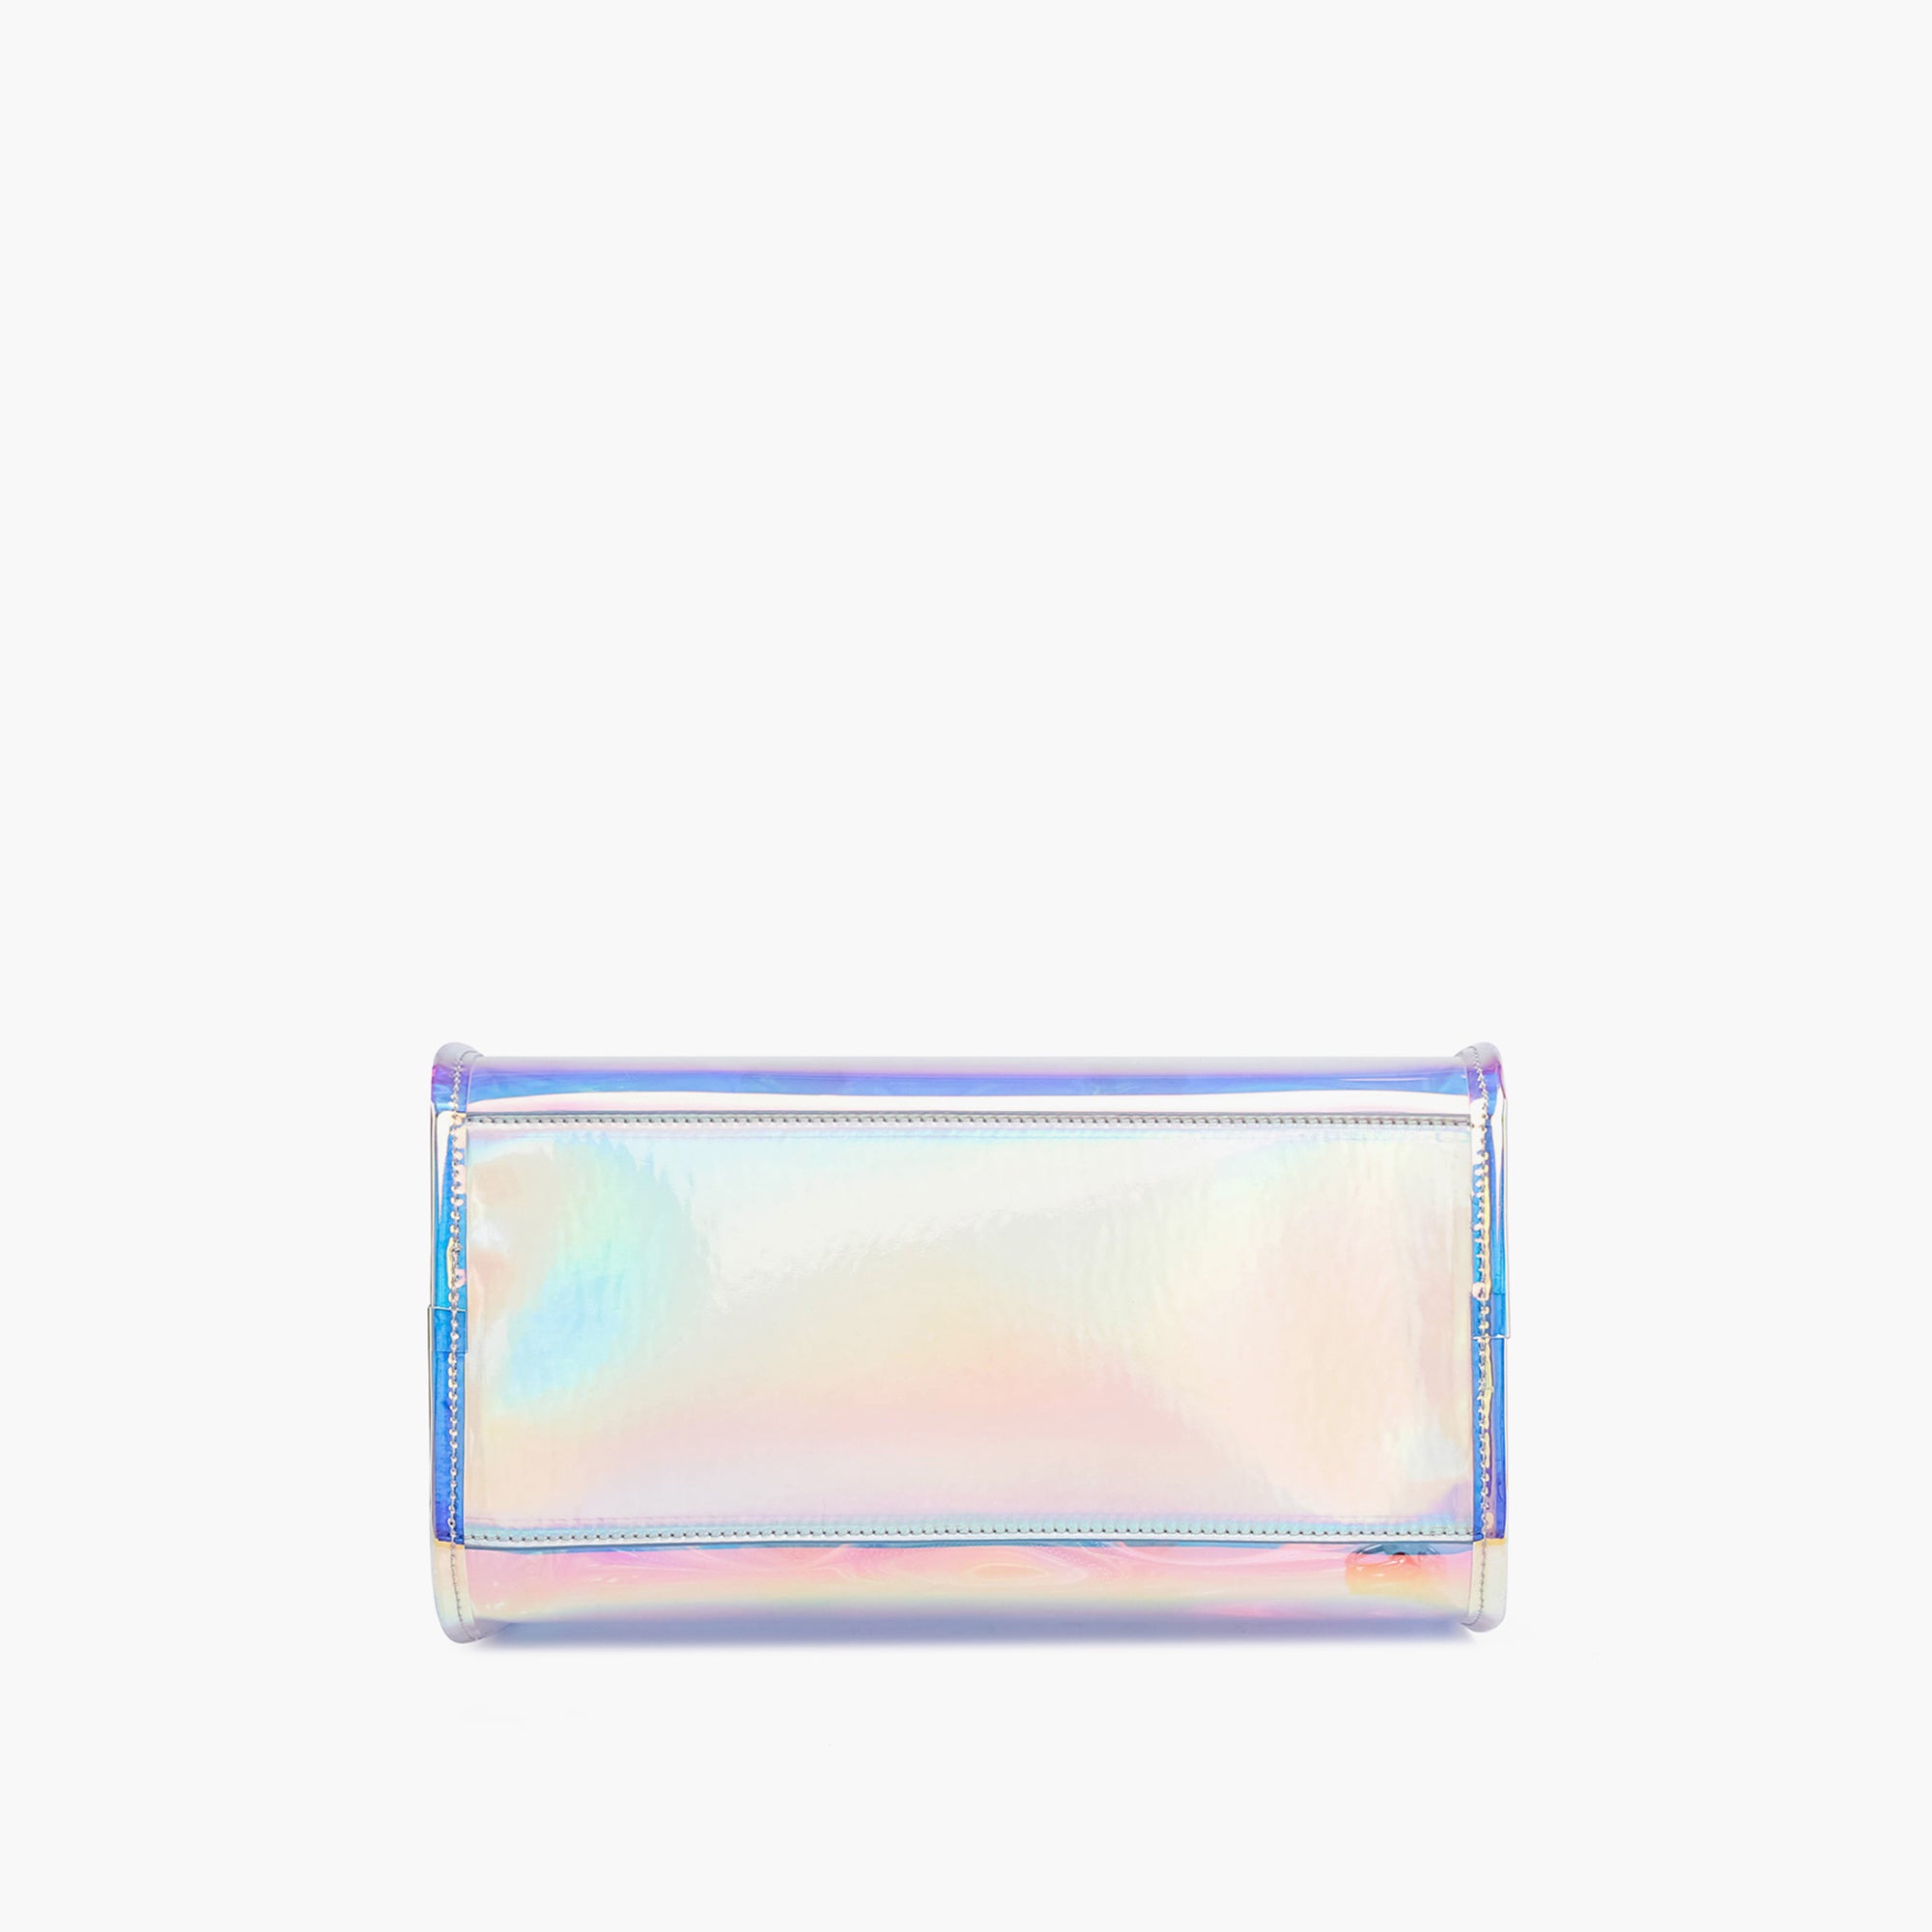 Iced Out Hologram Clear Satchel